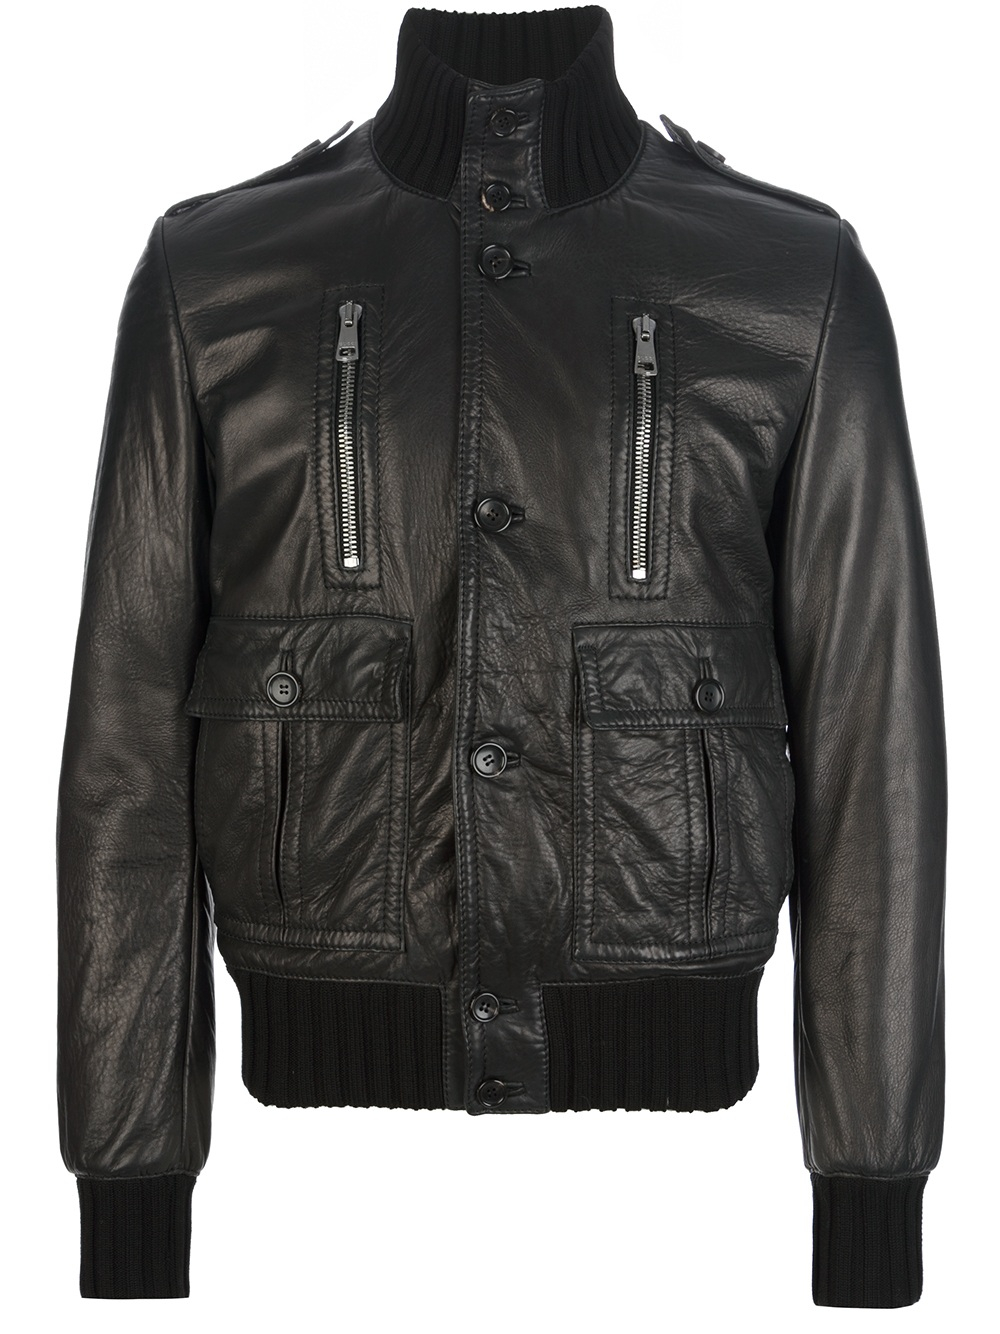 Lyst - Gucci Leather Jacket in Black for Men